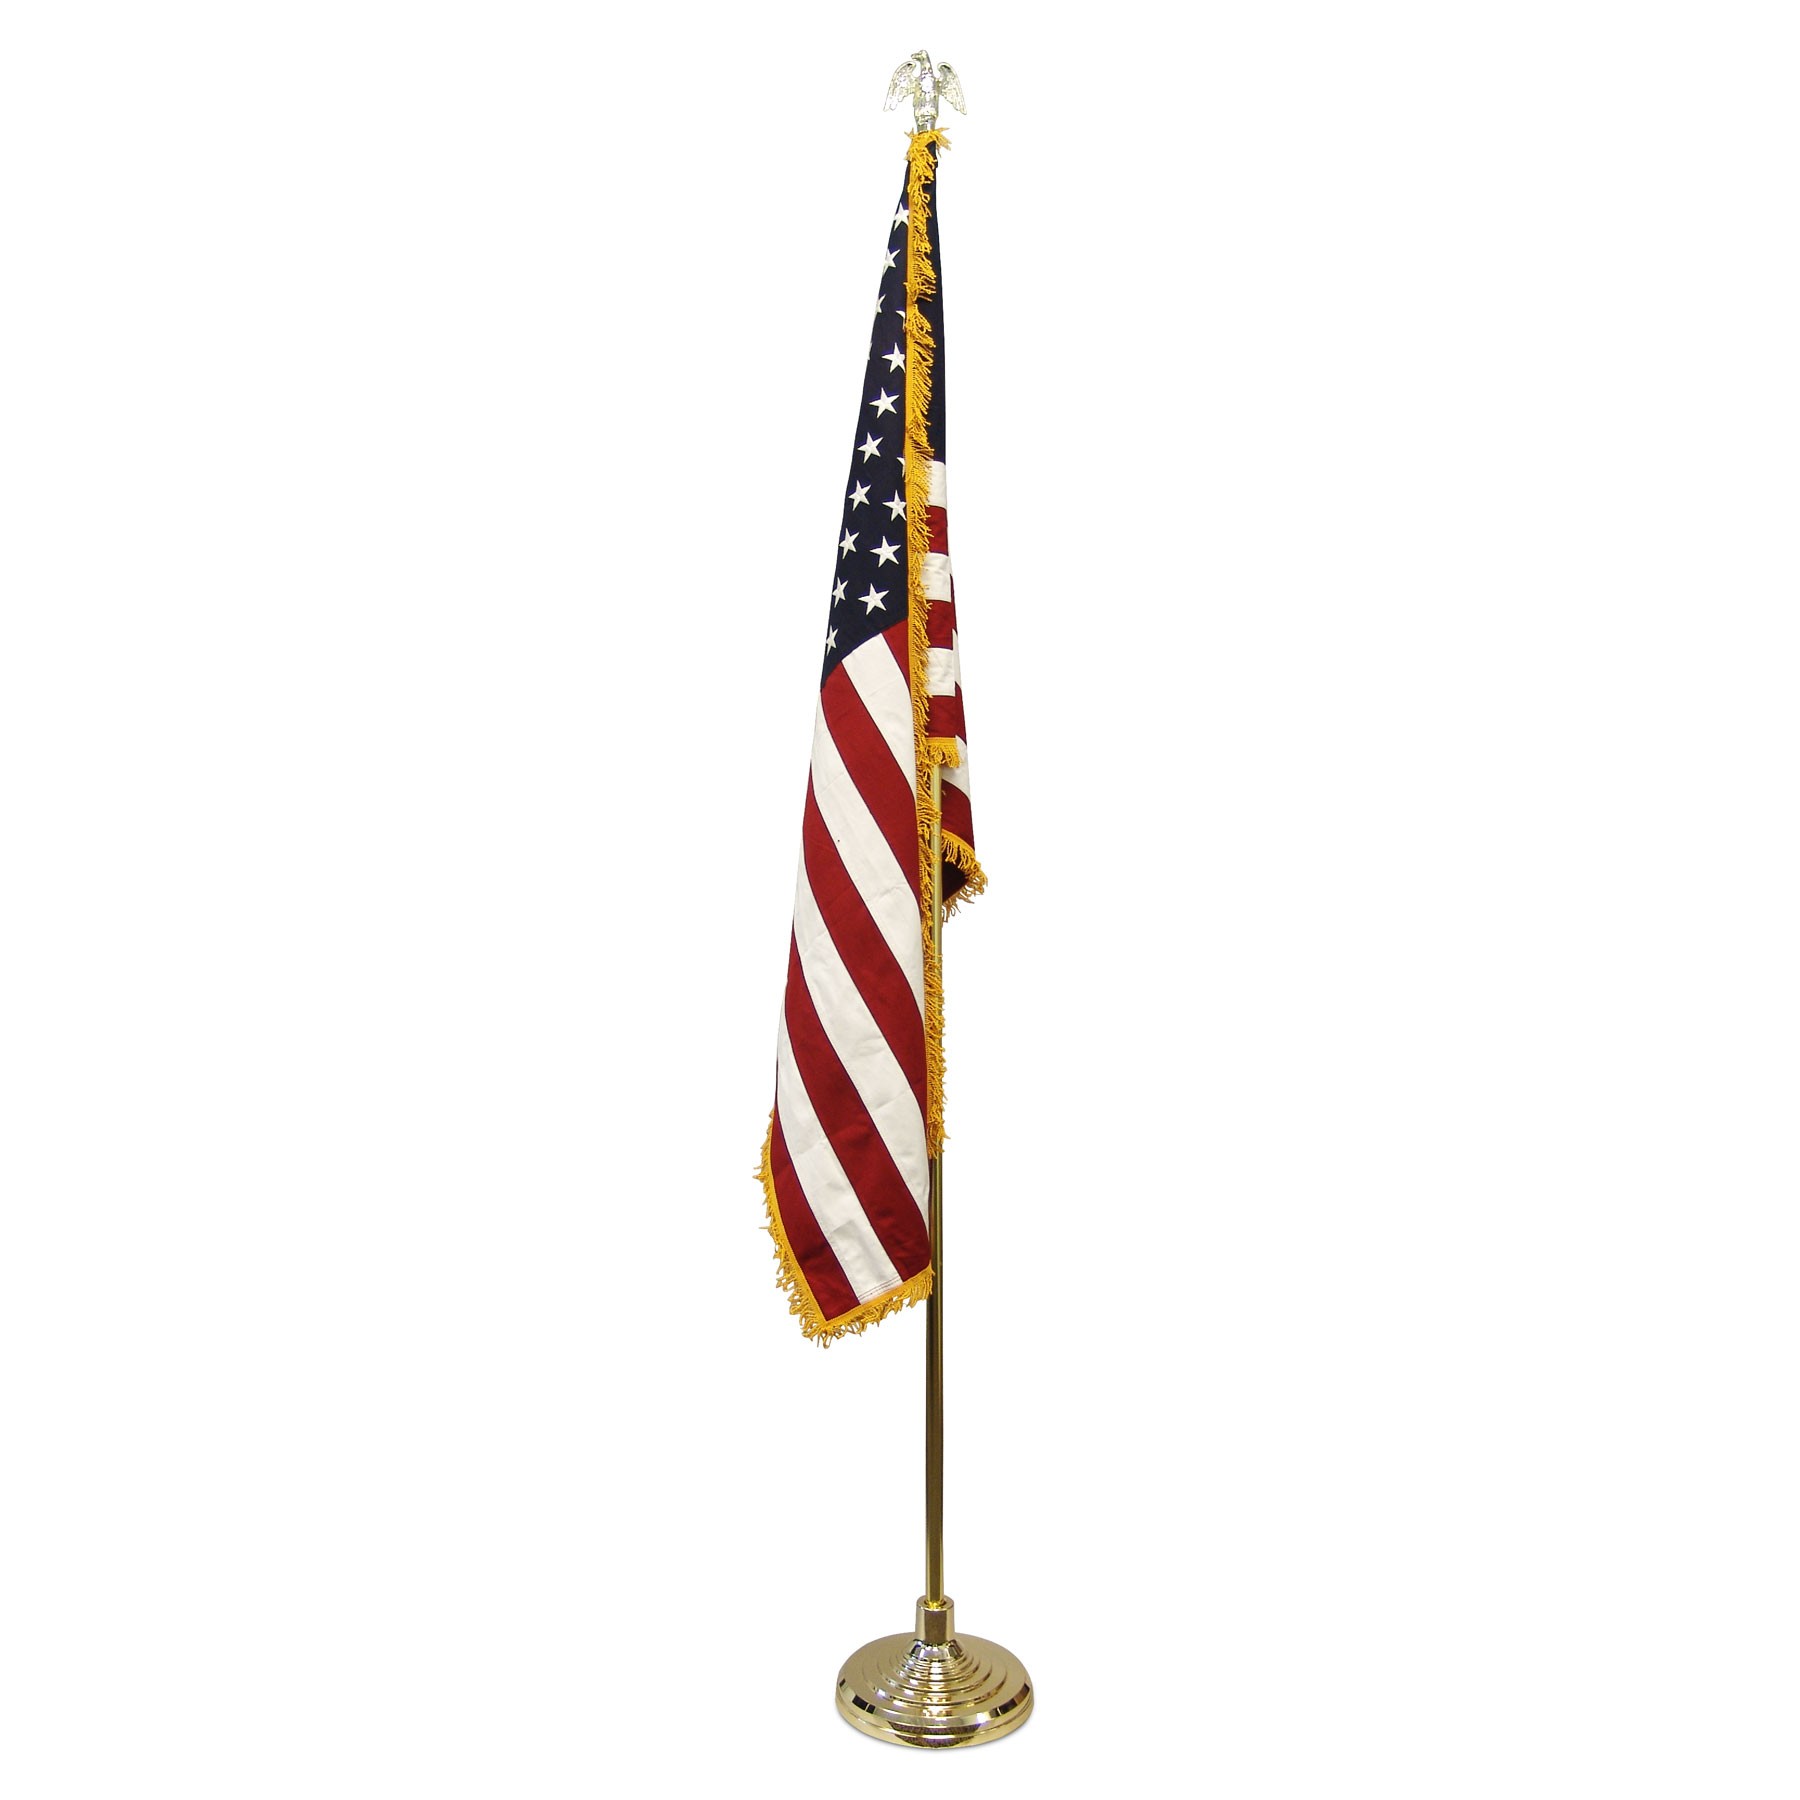 Low Cost Super Tough Indoor American Flag and Pole Kit